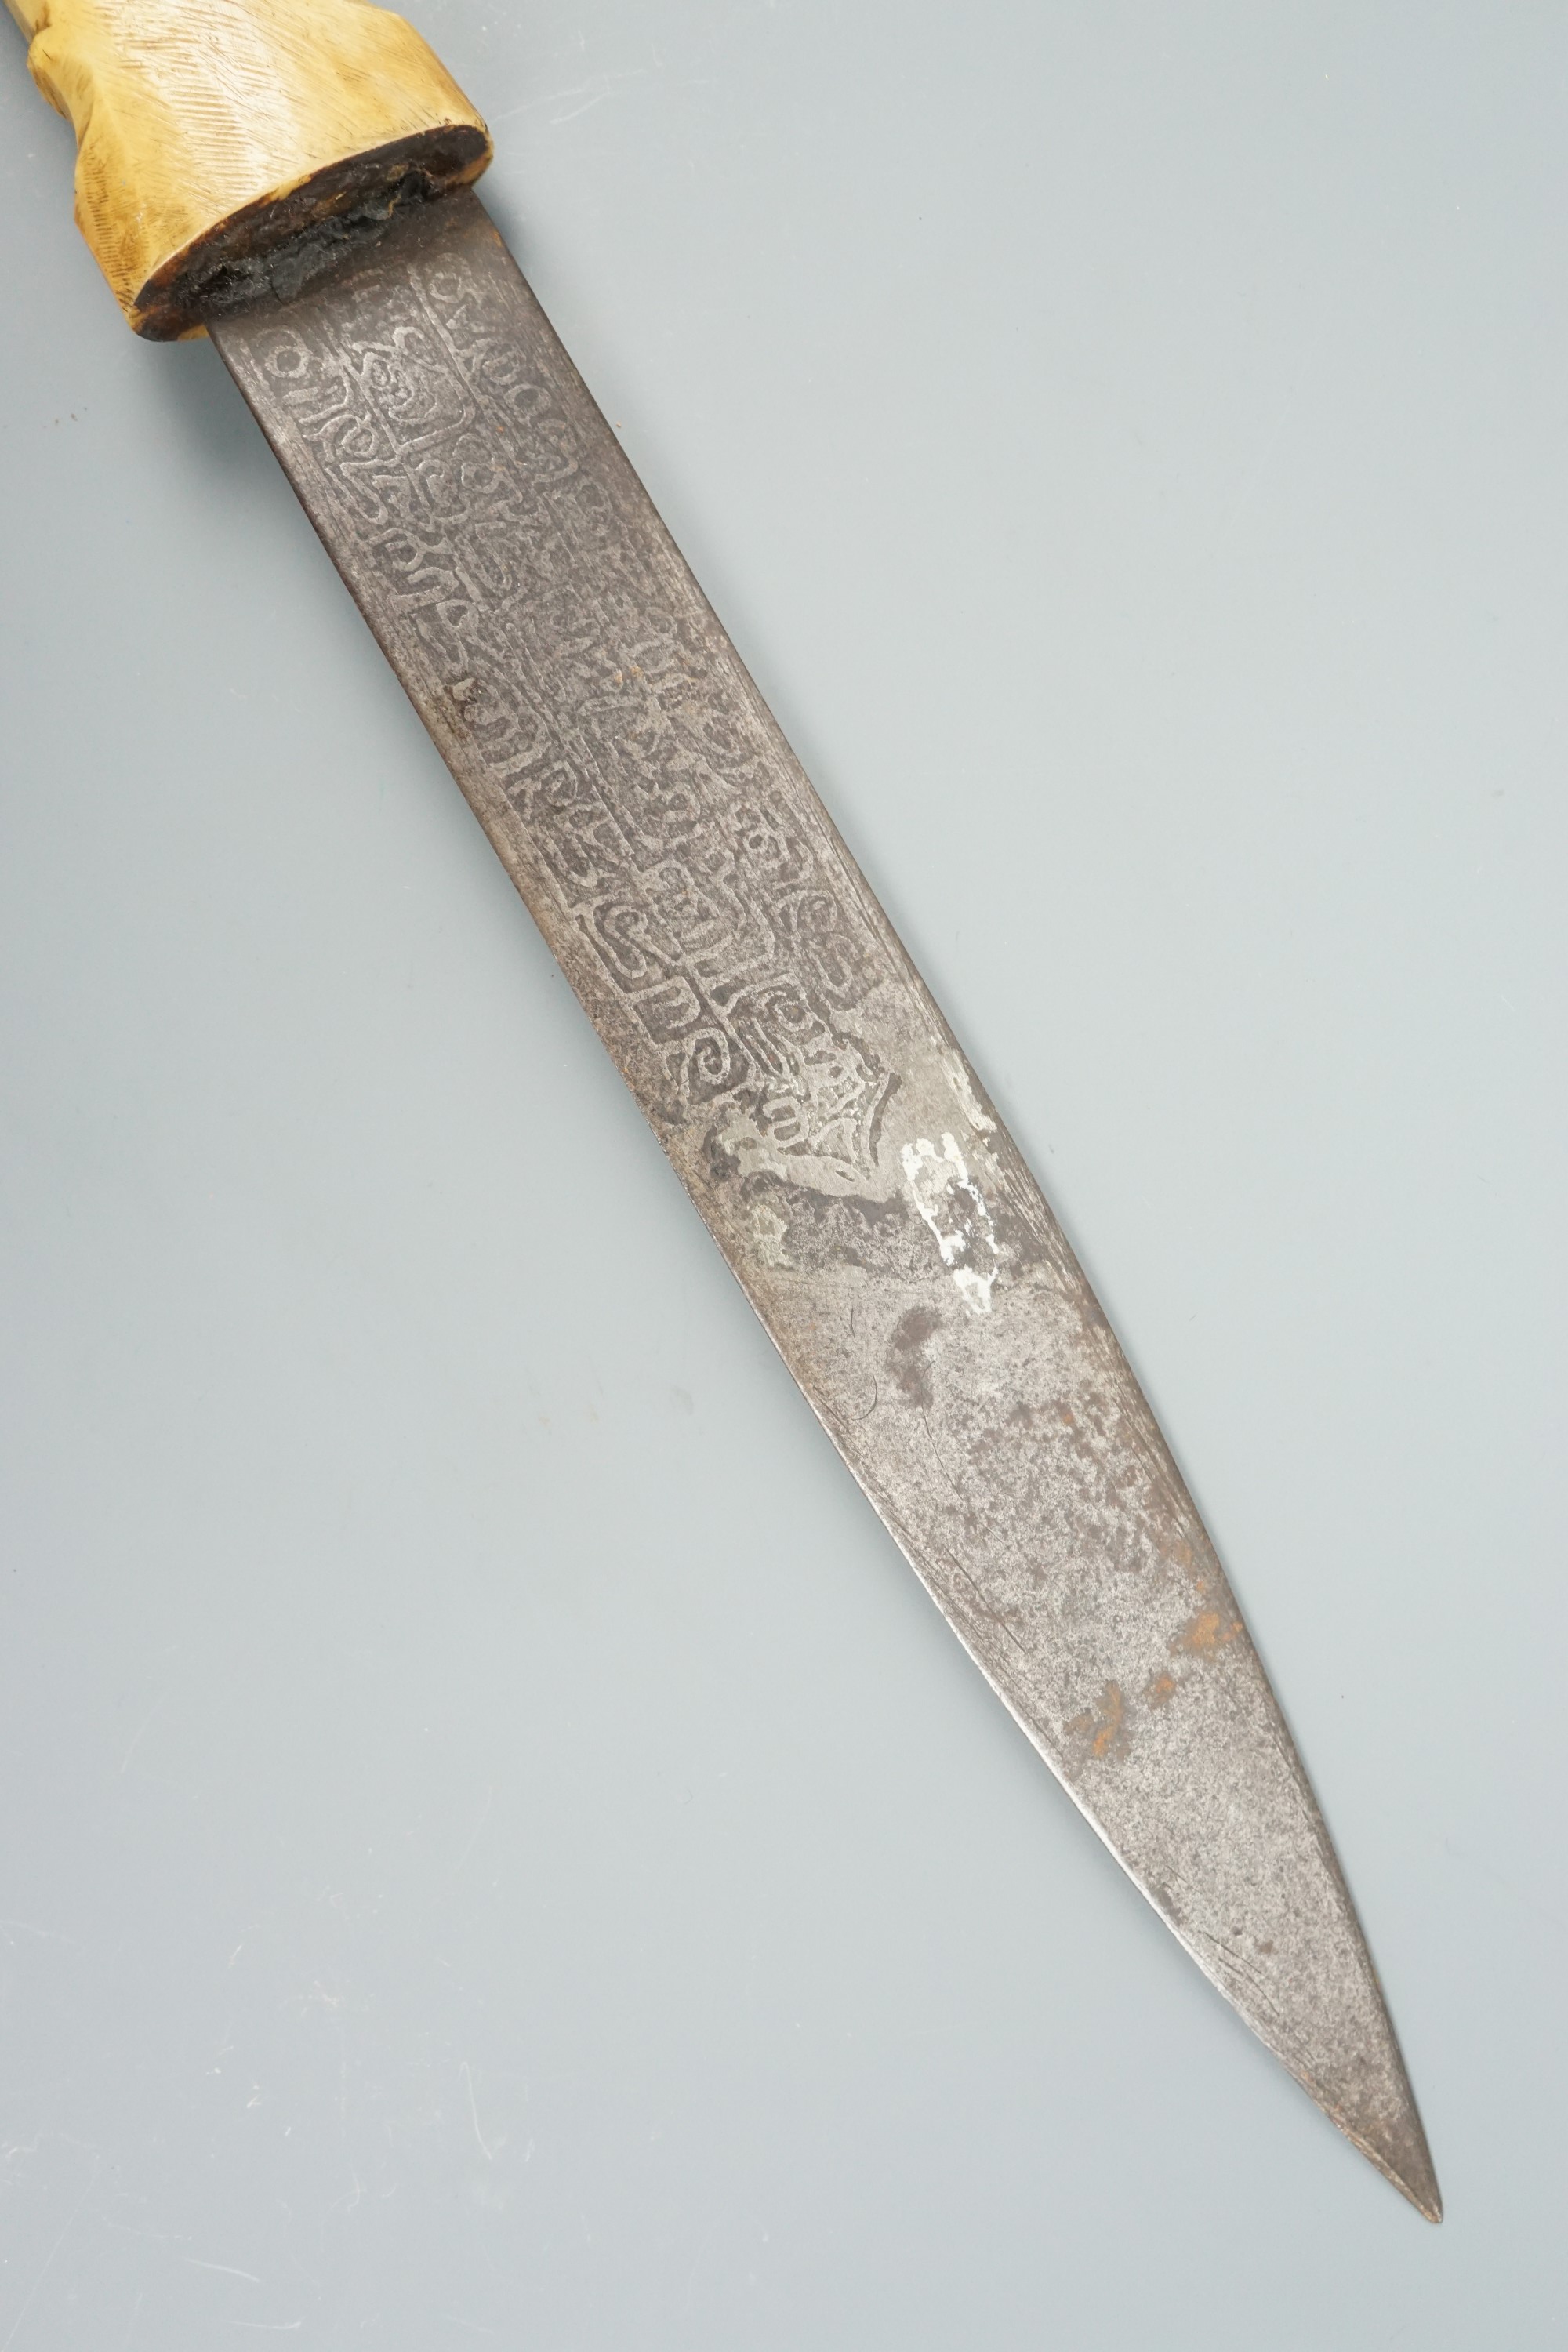 Two Middle Eastern bone-handled knives, having etched Islamic script on their blades - Image 5 of 5